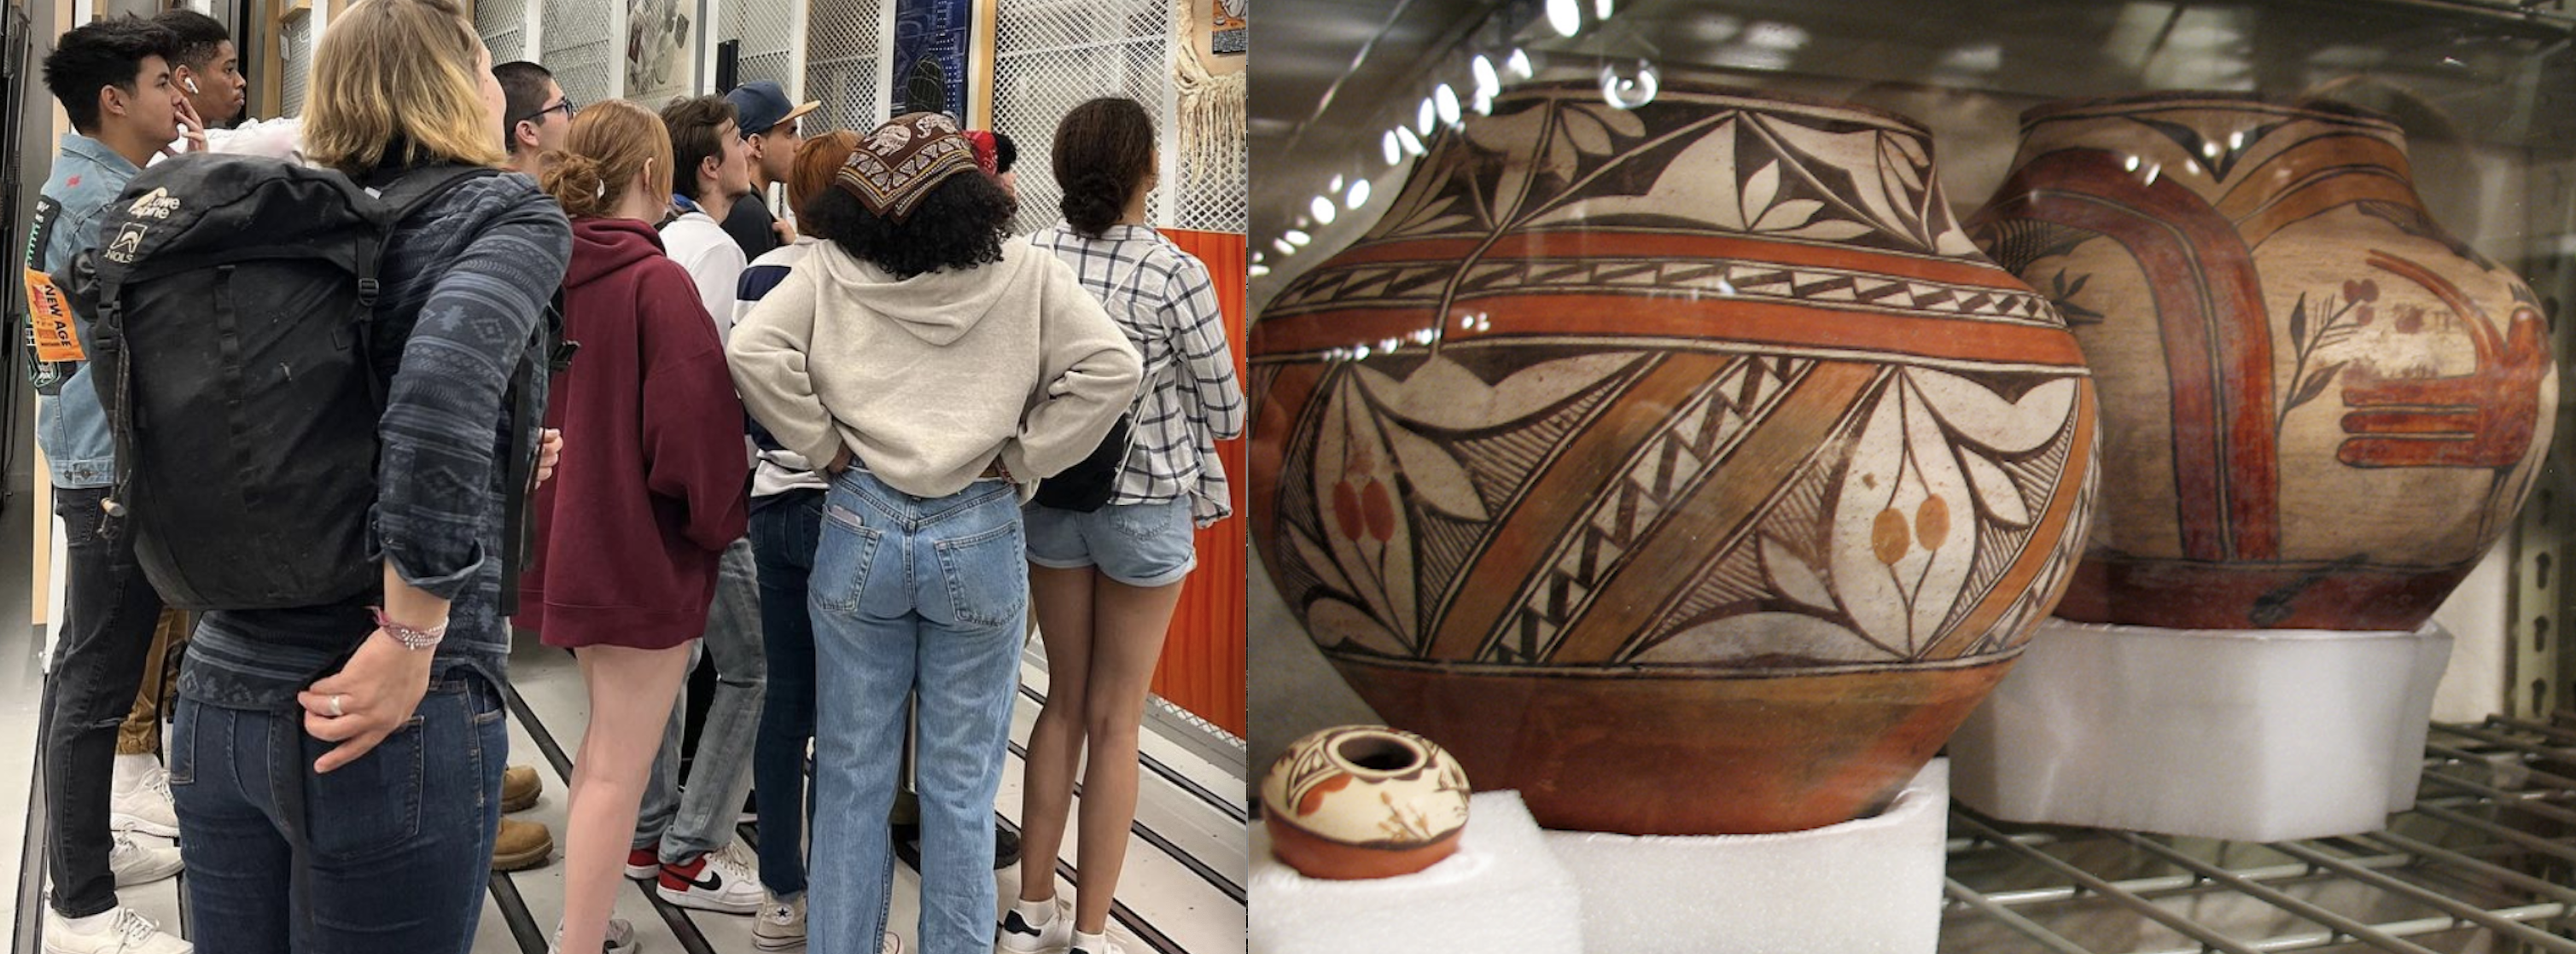 students looking at art, pottery